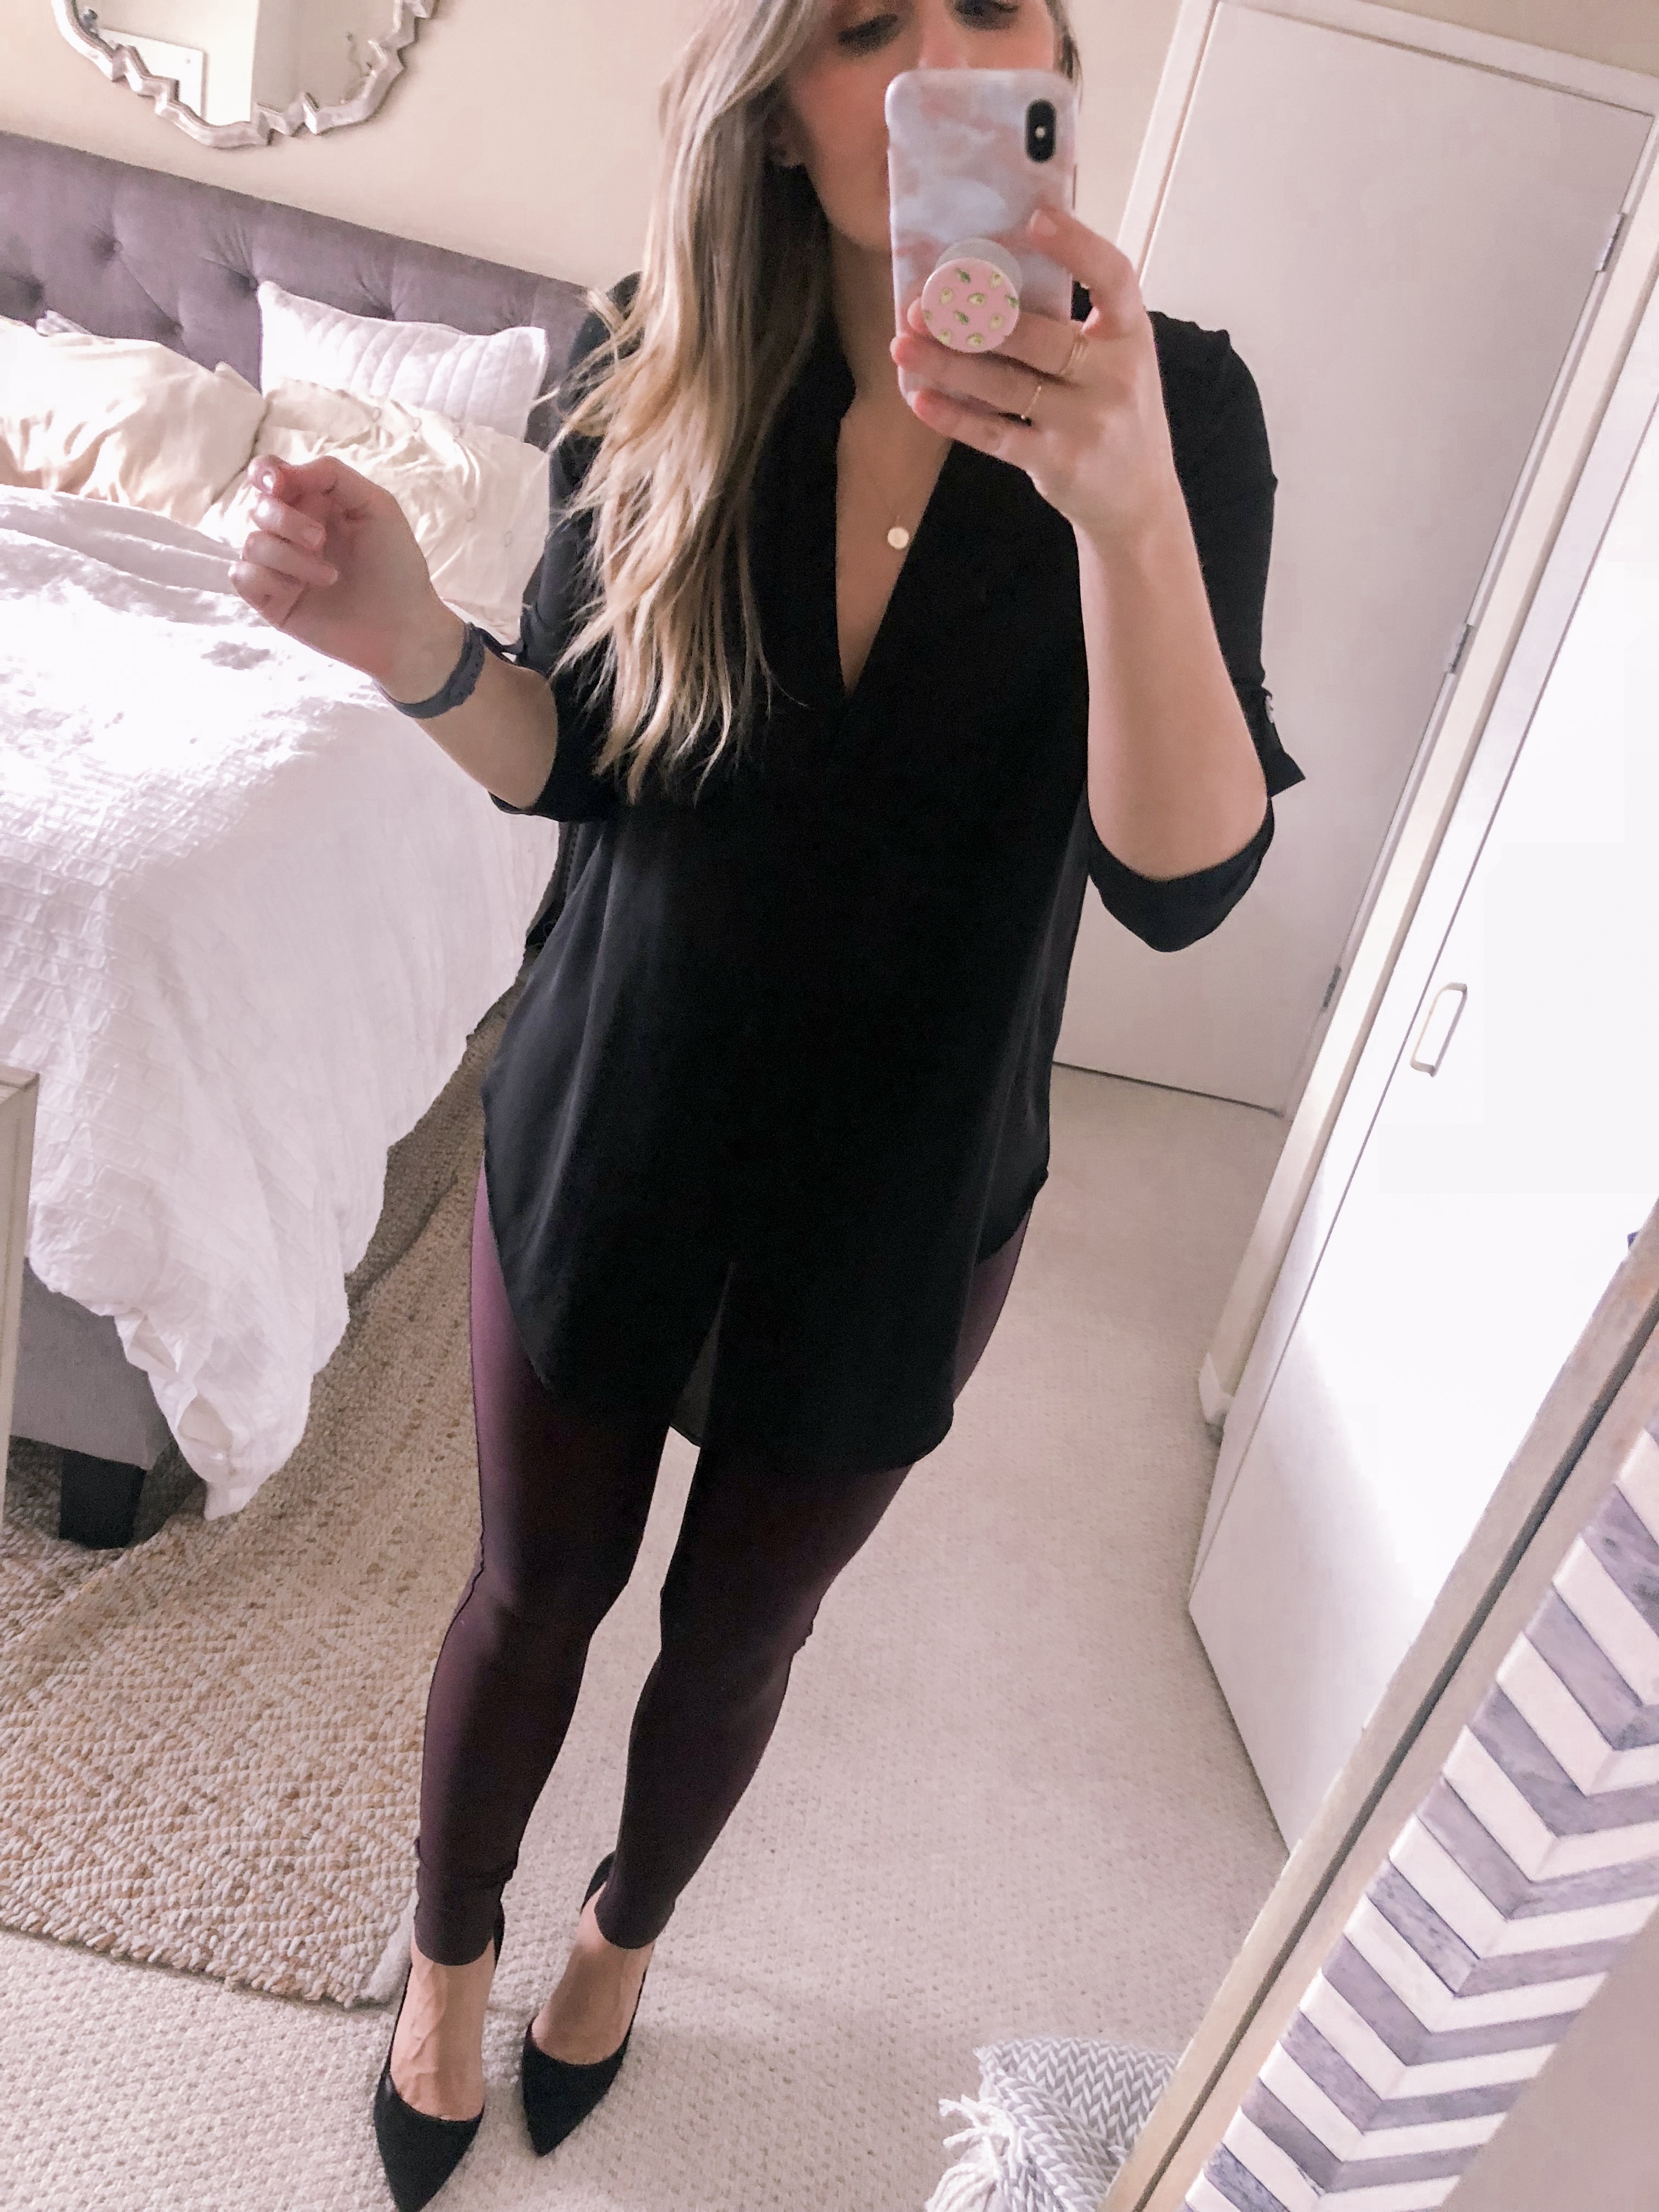 Popular Chicago fashion blogger styles the Spanx Faux Leather Leggings in burgundy with a black tunic for under $25 for a office outfit idea.